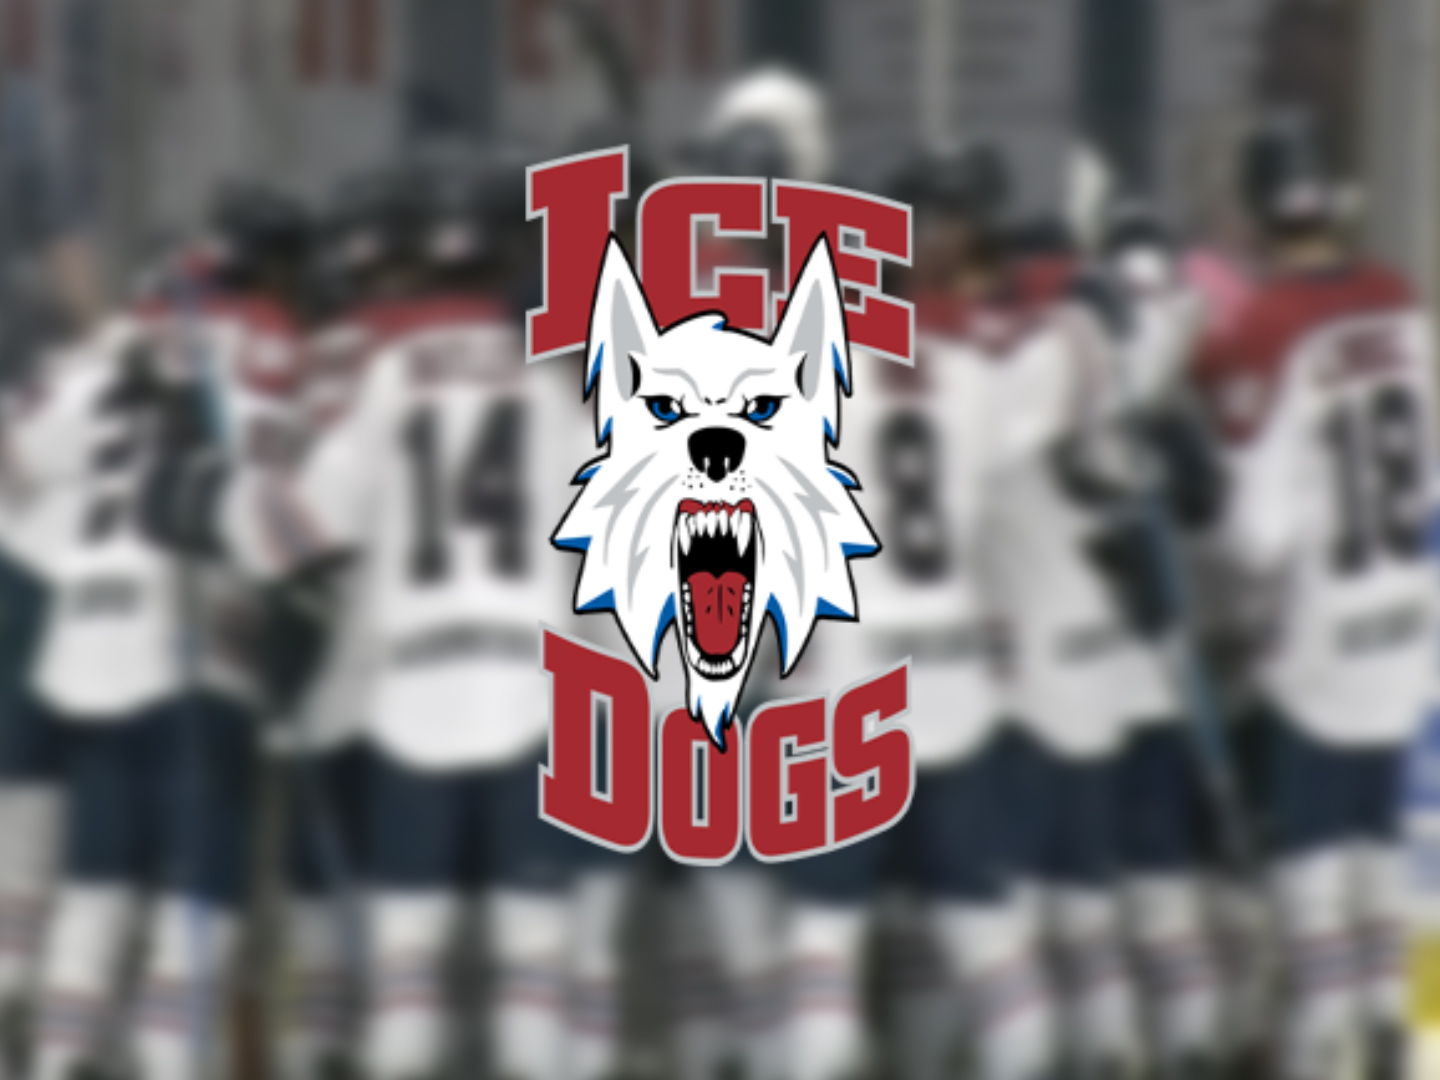 Fairbanks Ice Dogs win Robertson Cup at Braemar Arena on REALice - REALice®